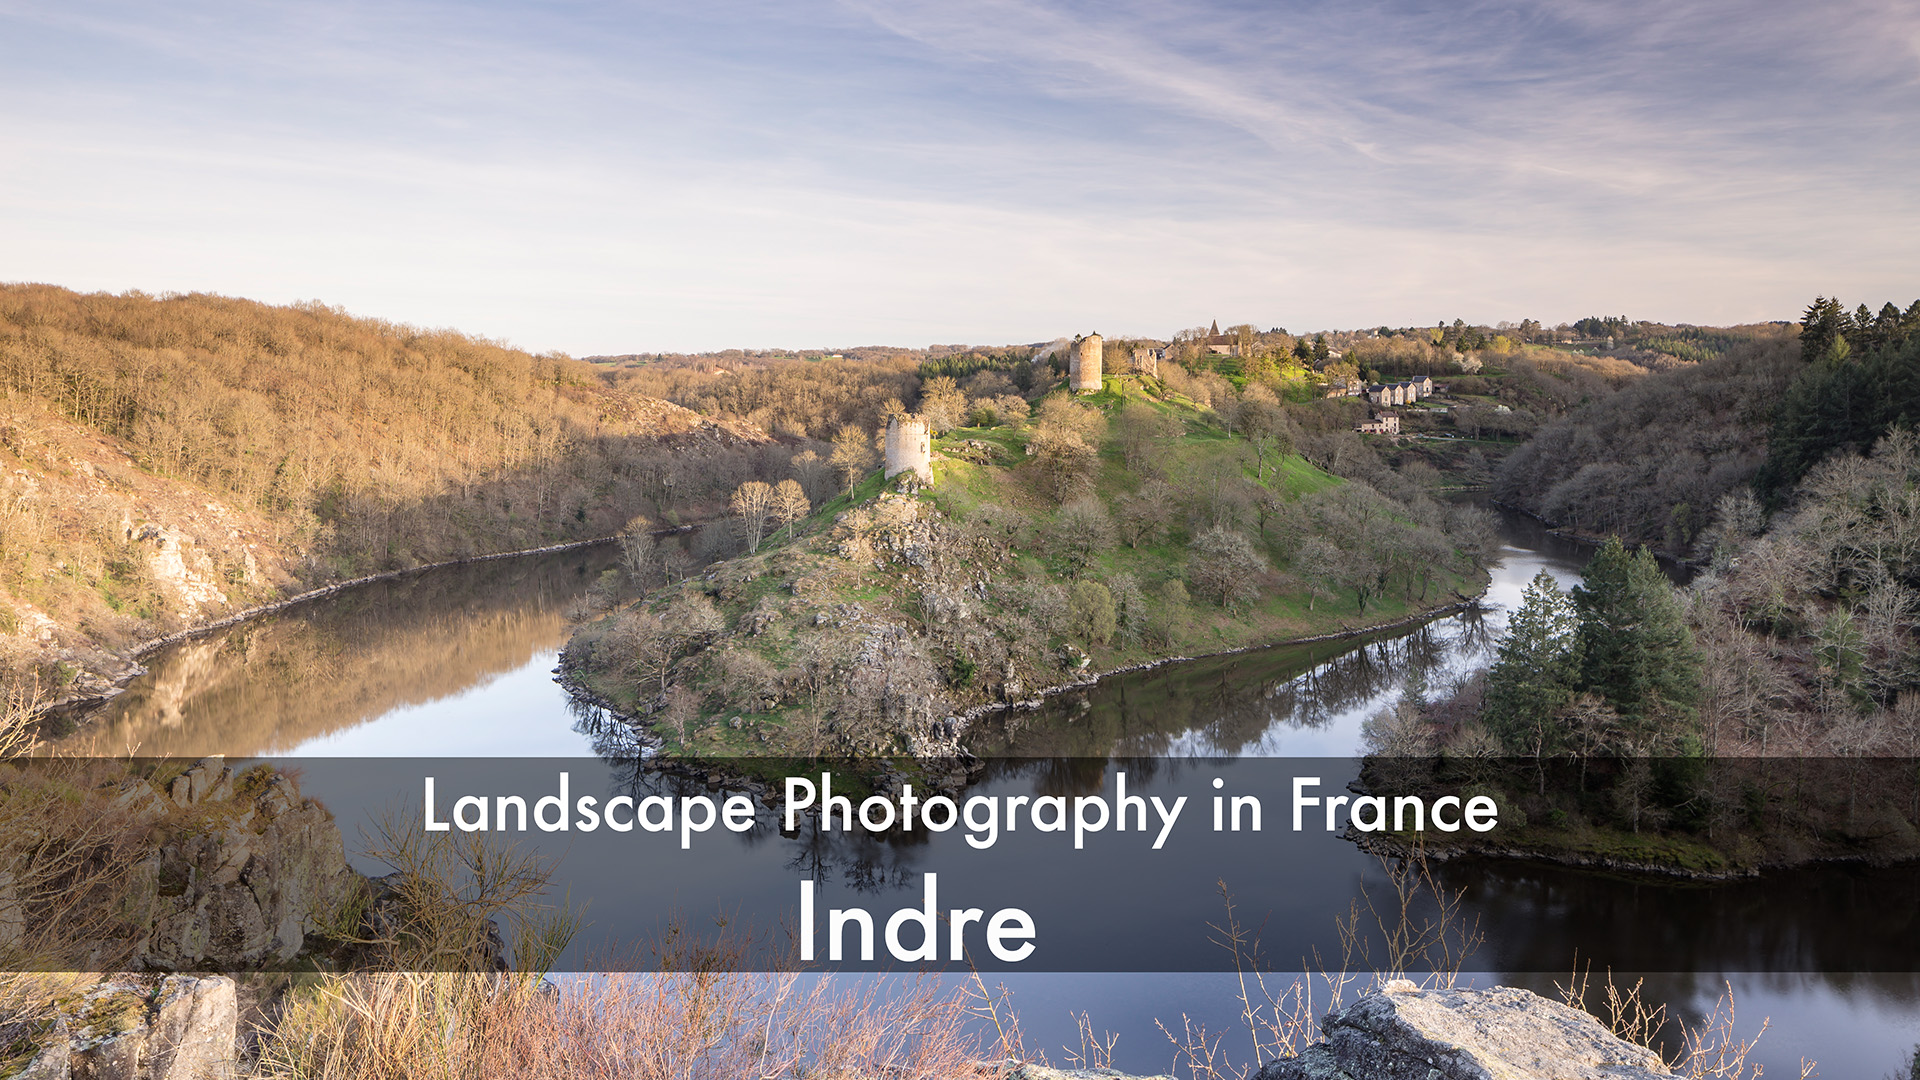 Landscape Photography in France. Indre.